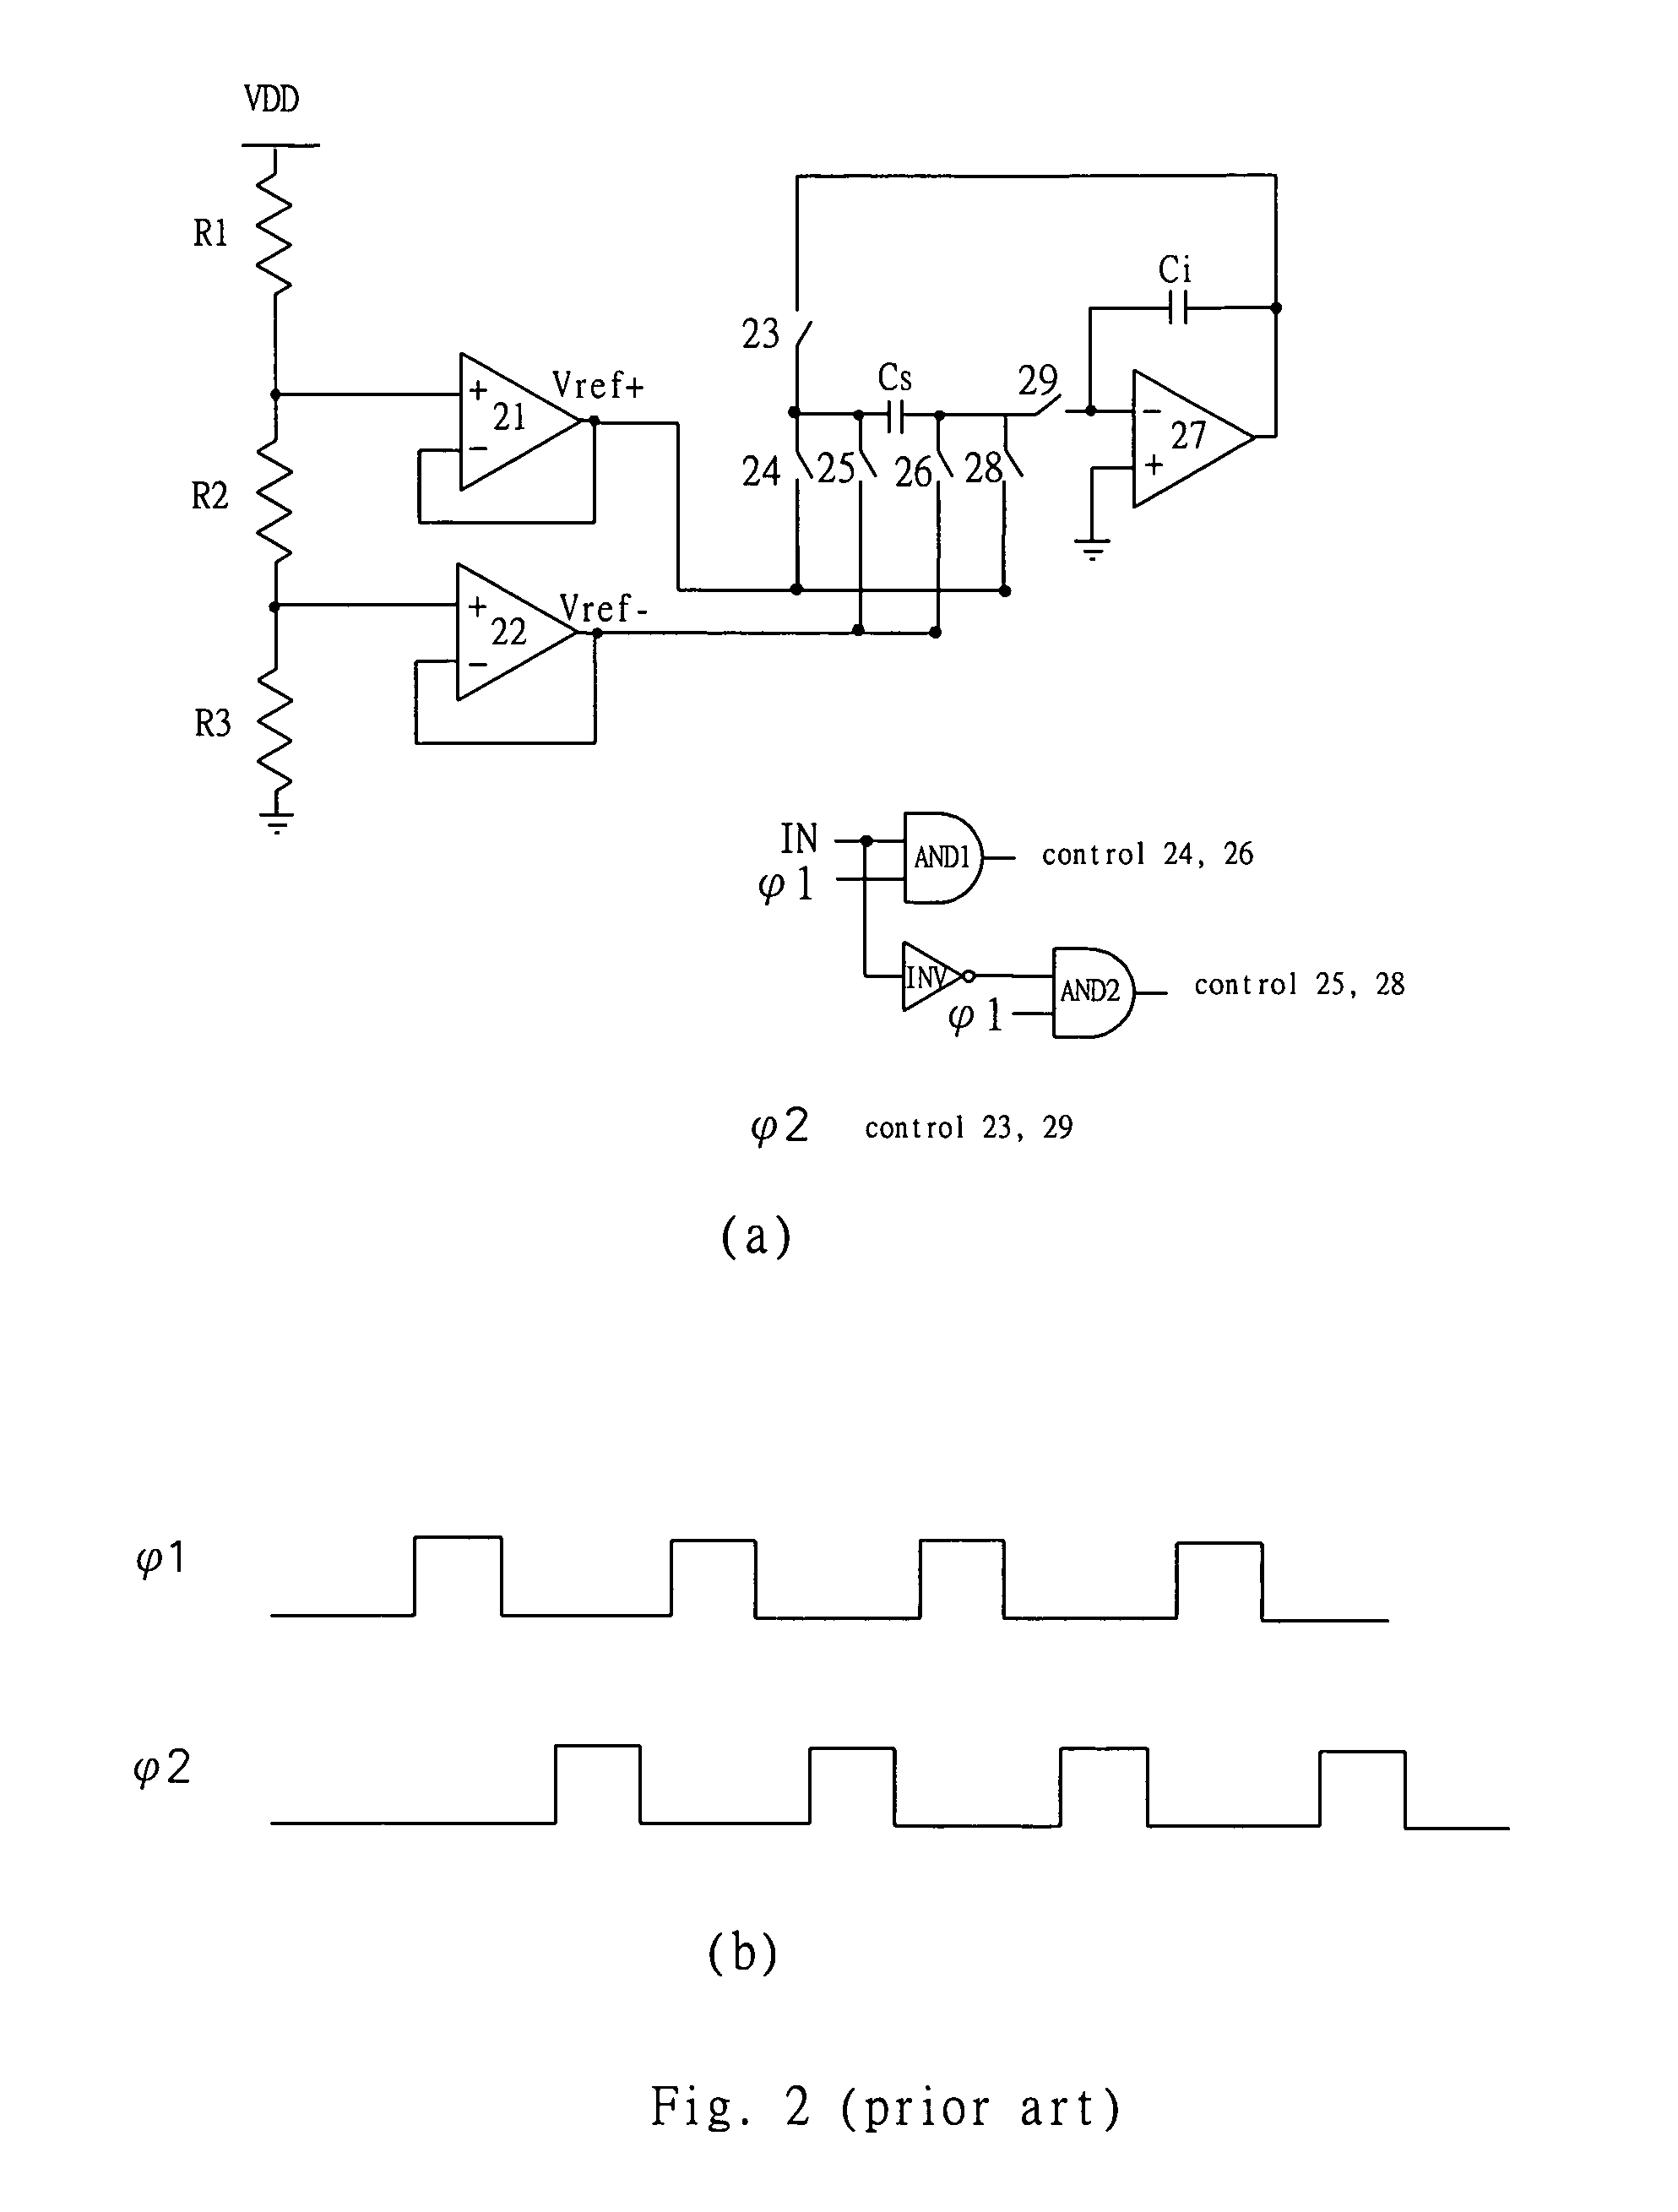 Circuit for using capacitor voltage divider in a delta-sigma digital-to-analog converter to generate reference voltage